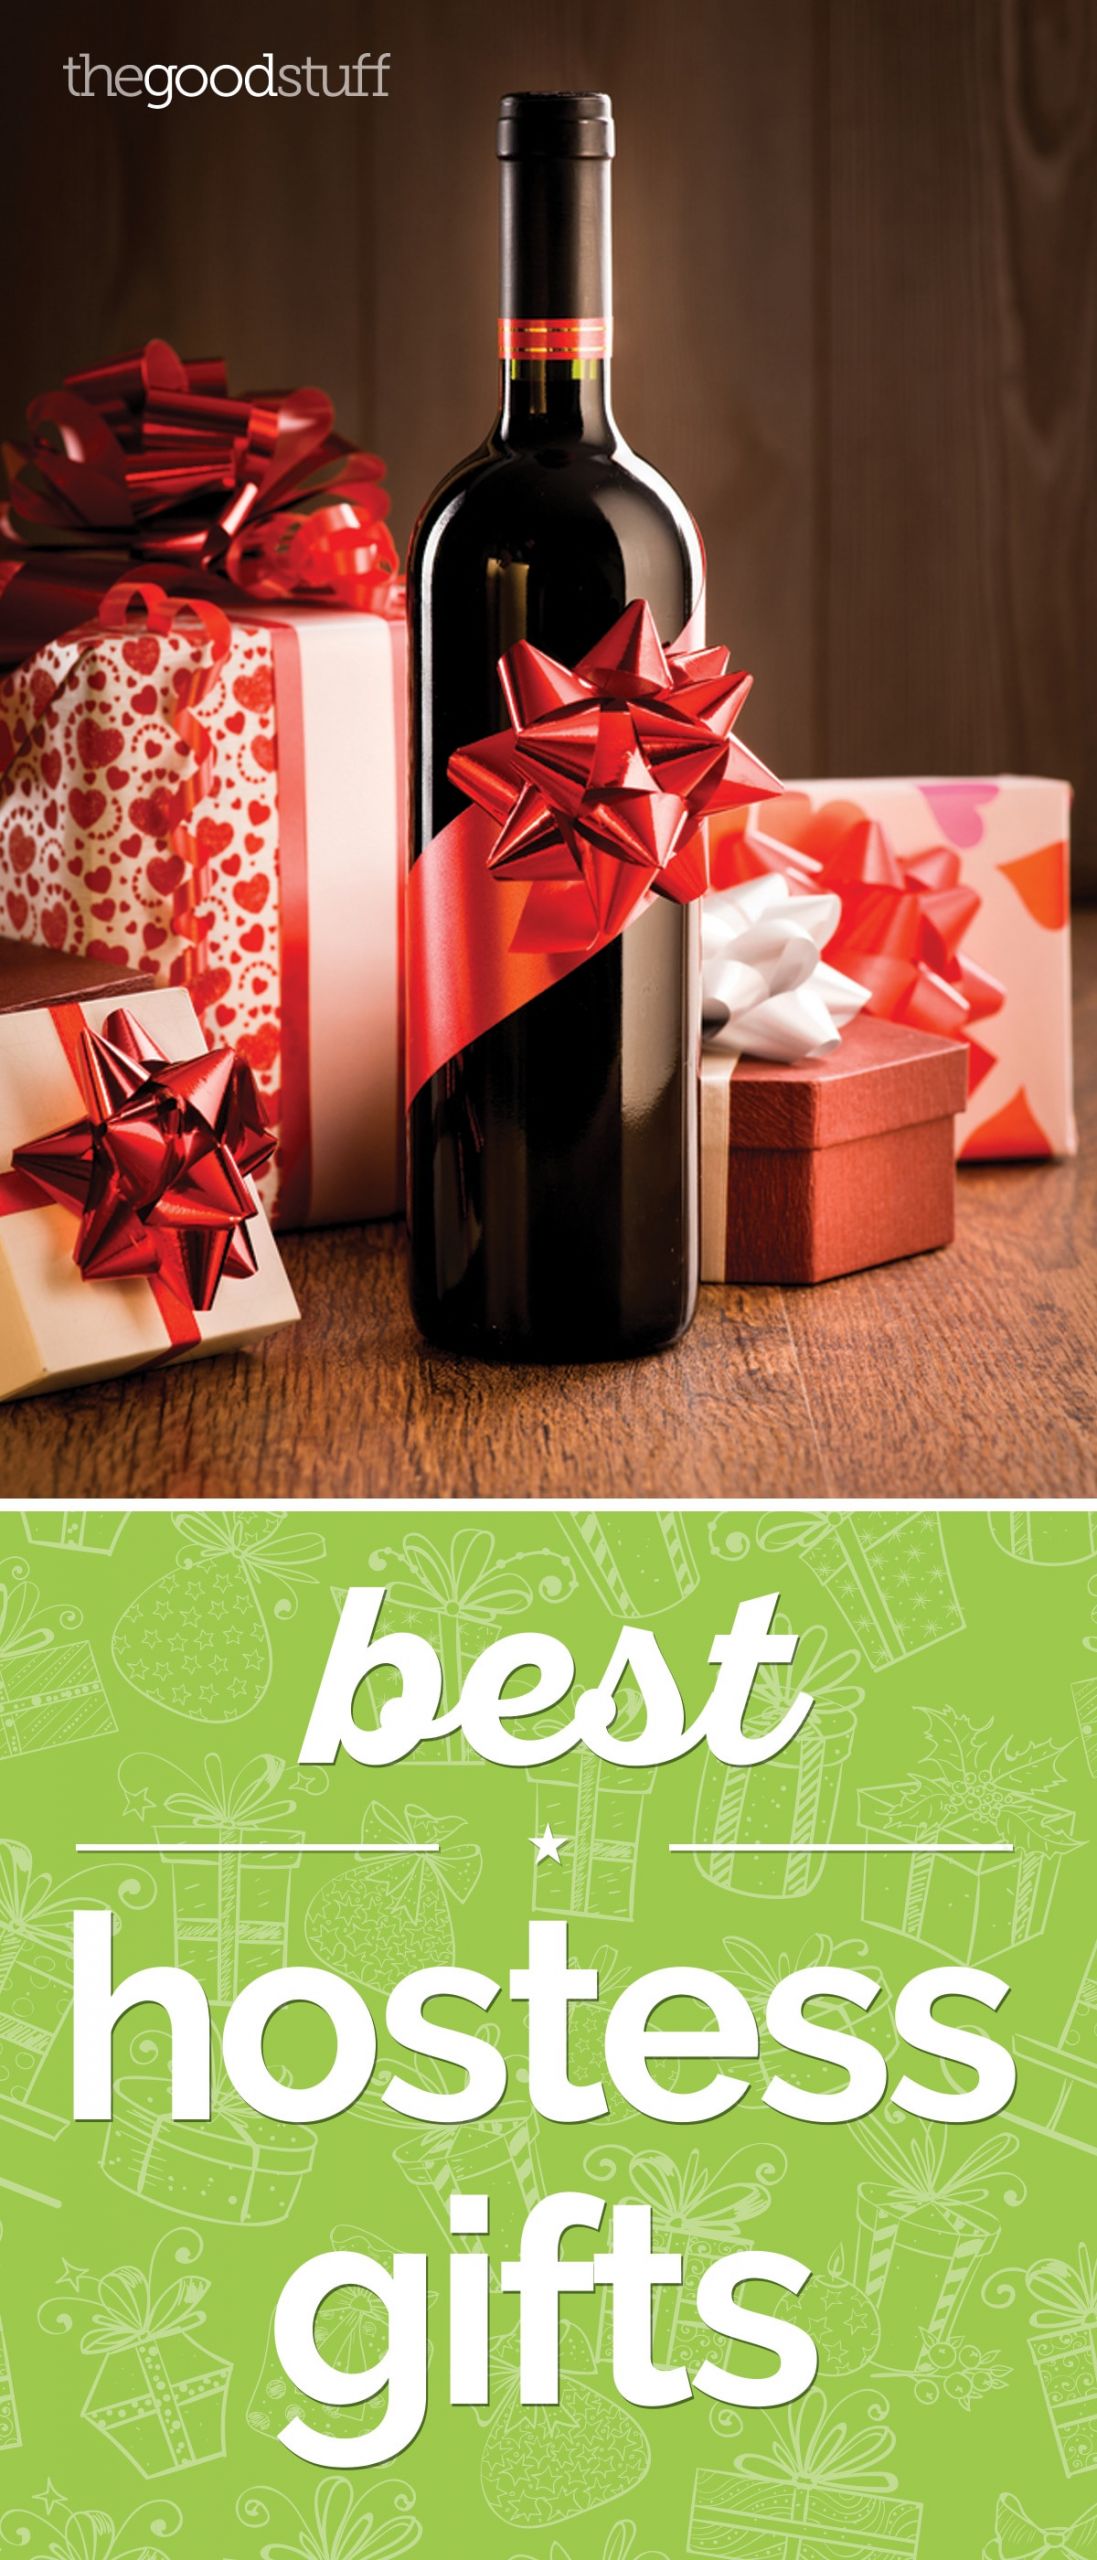 Hostess Gift Ideas For Holiday Party
 Make Sure You re Invited Back Next Year Best Hostess